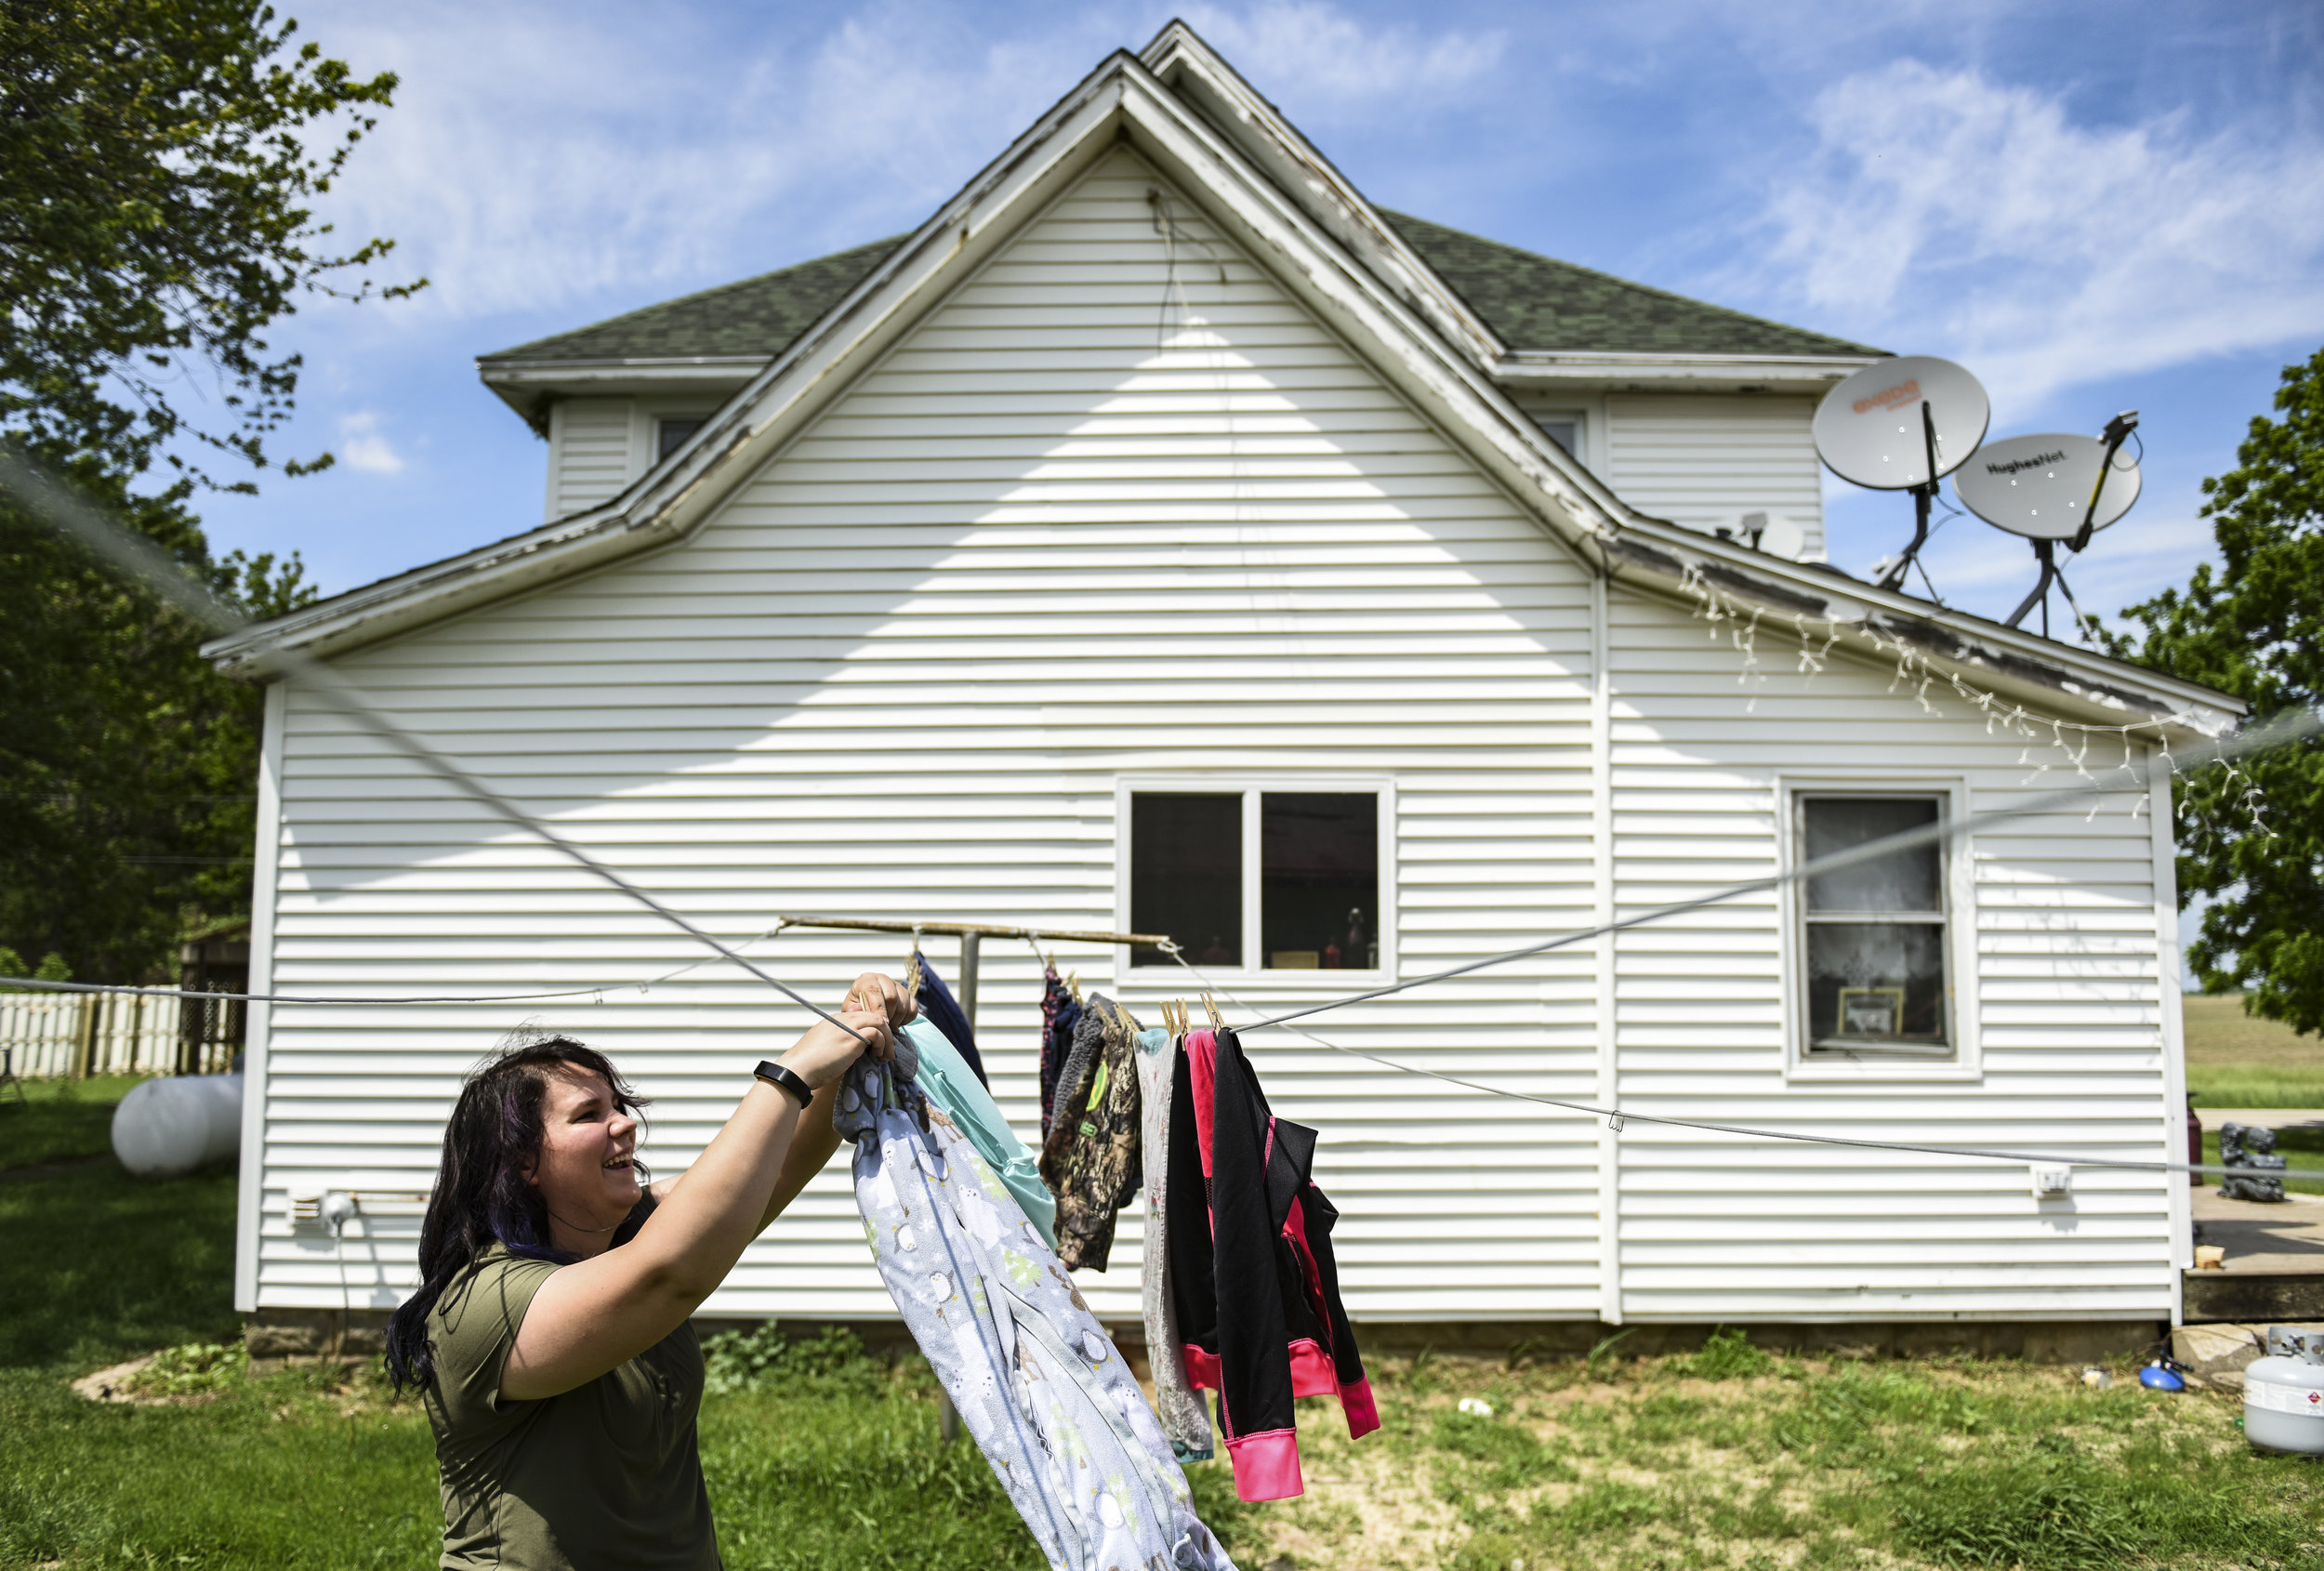  Julia DePauw hangs clean clothes on a clothesline before heading over to her in-laws' house to work on chores June 4 in Port Byron. 